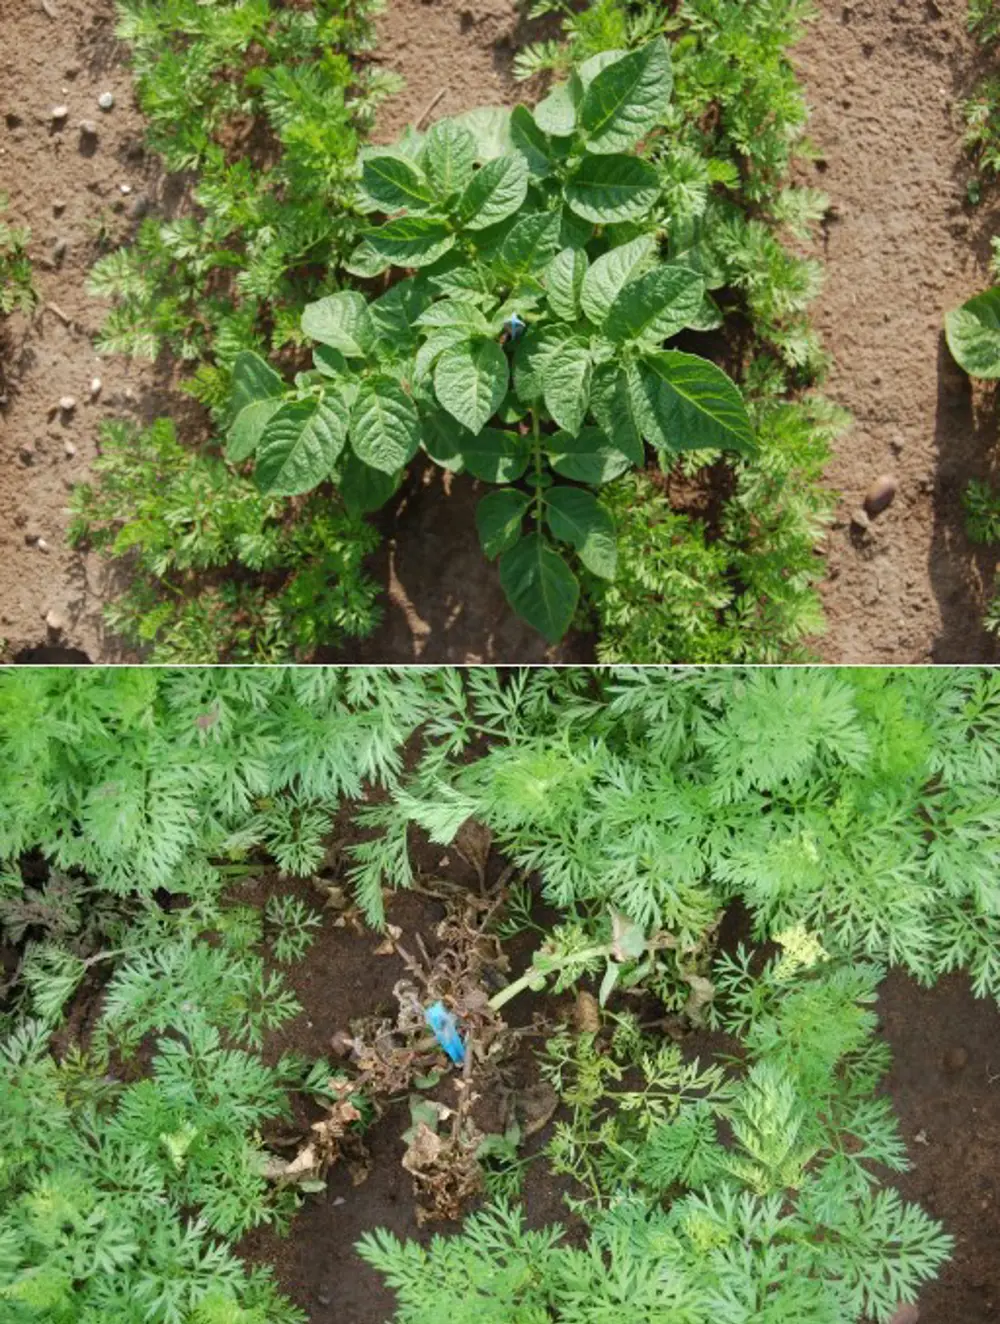 (top) A large weed plant present between two rows of carrot crops and (bottom) the dead weed plant after spot-treatment with the rows of carrot crops growing around it.